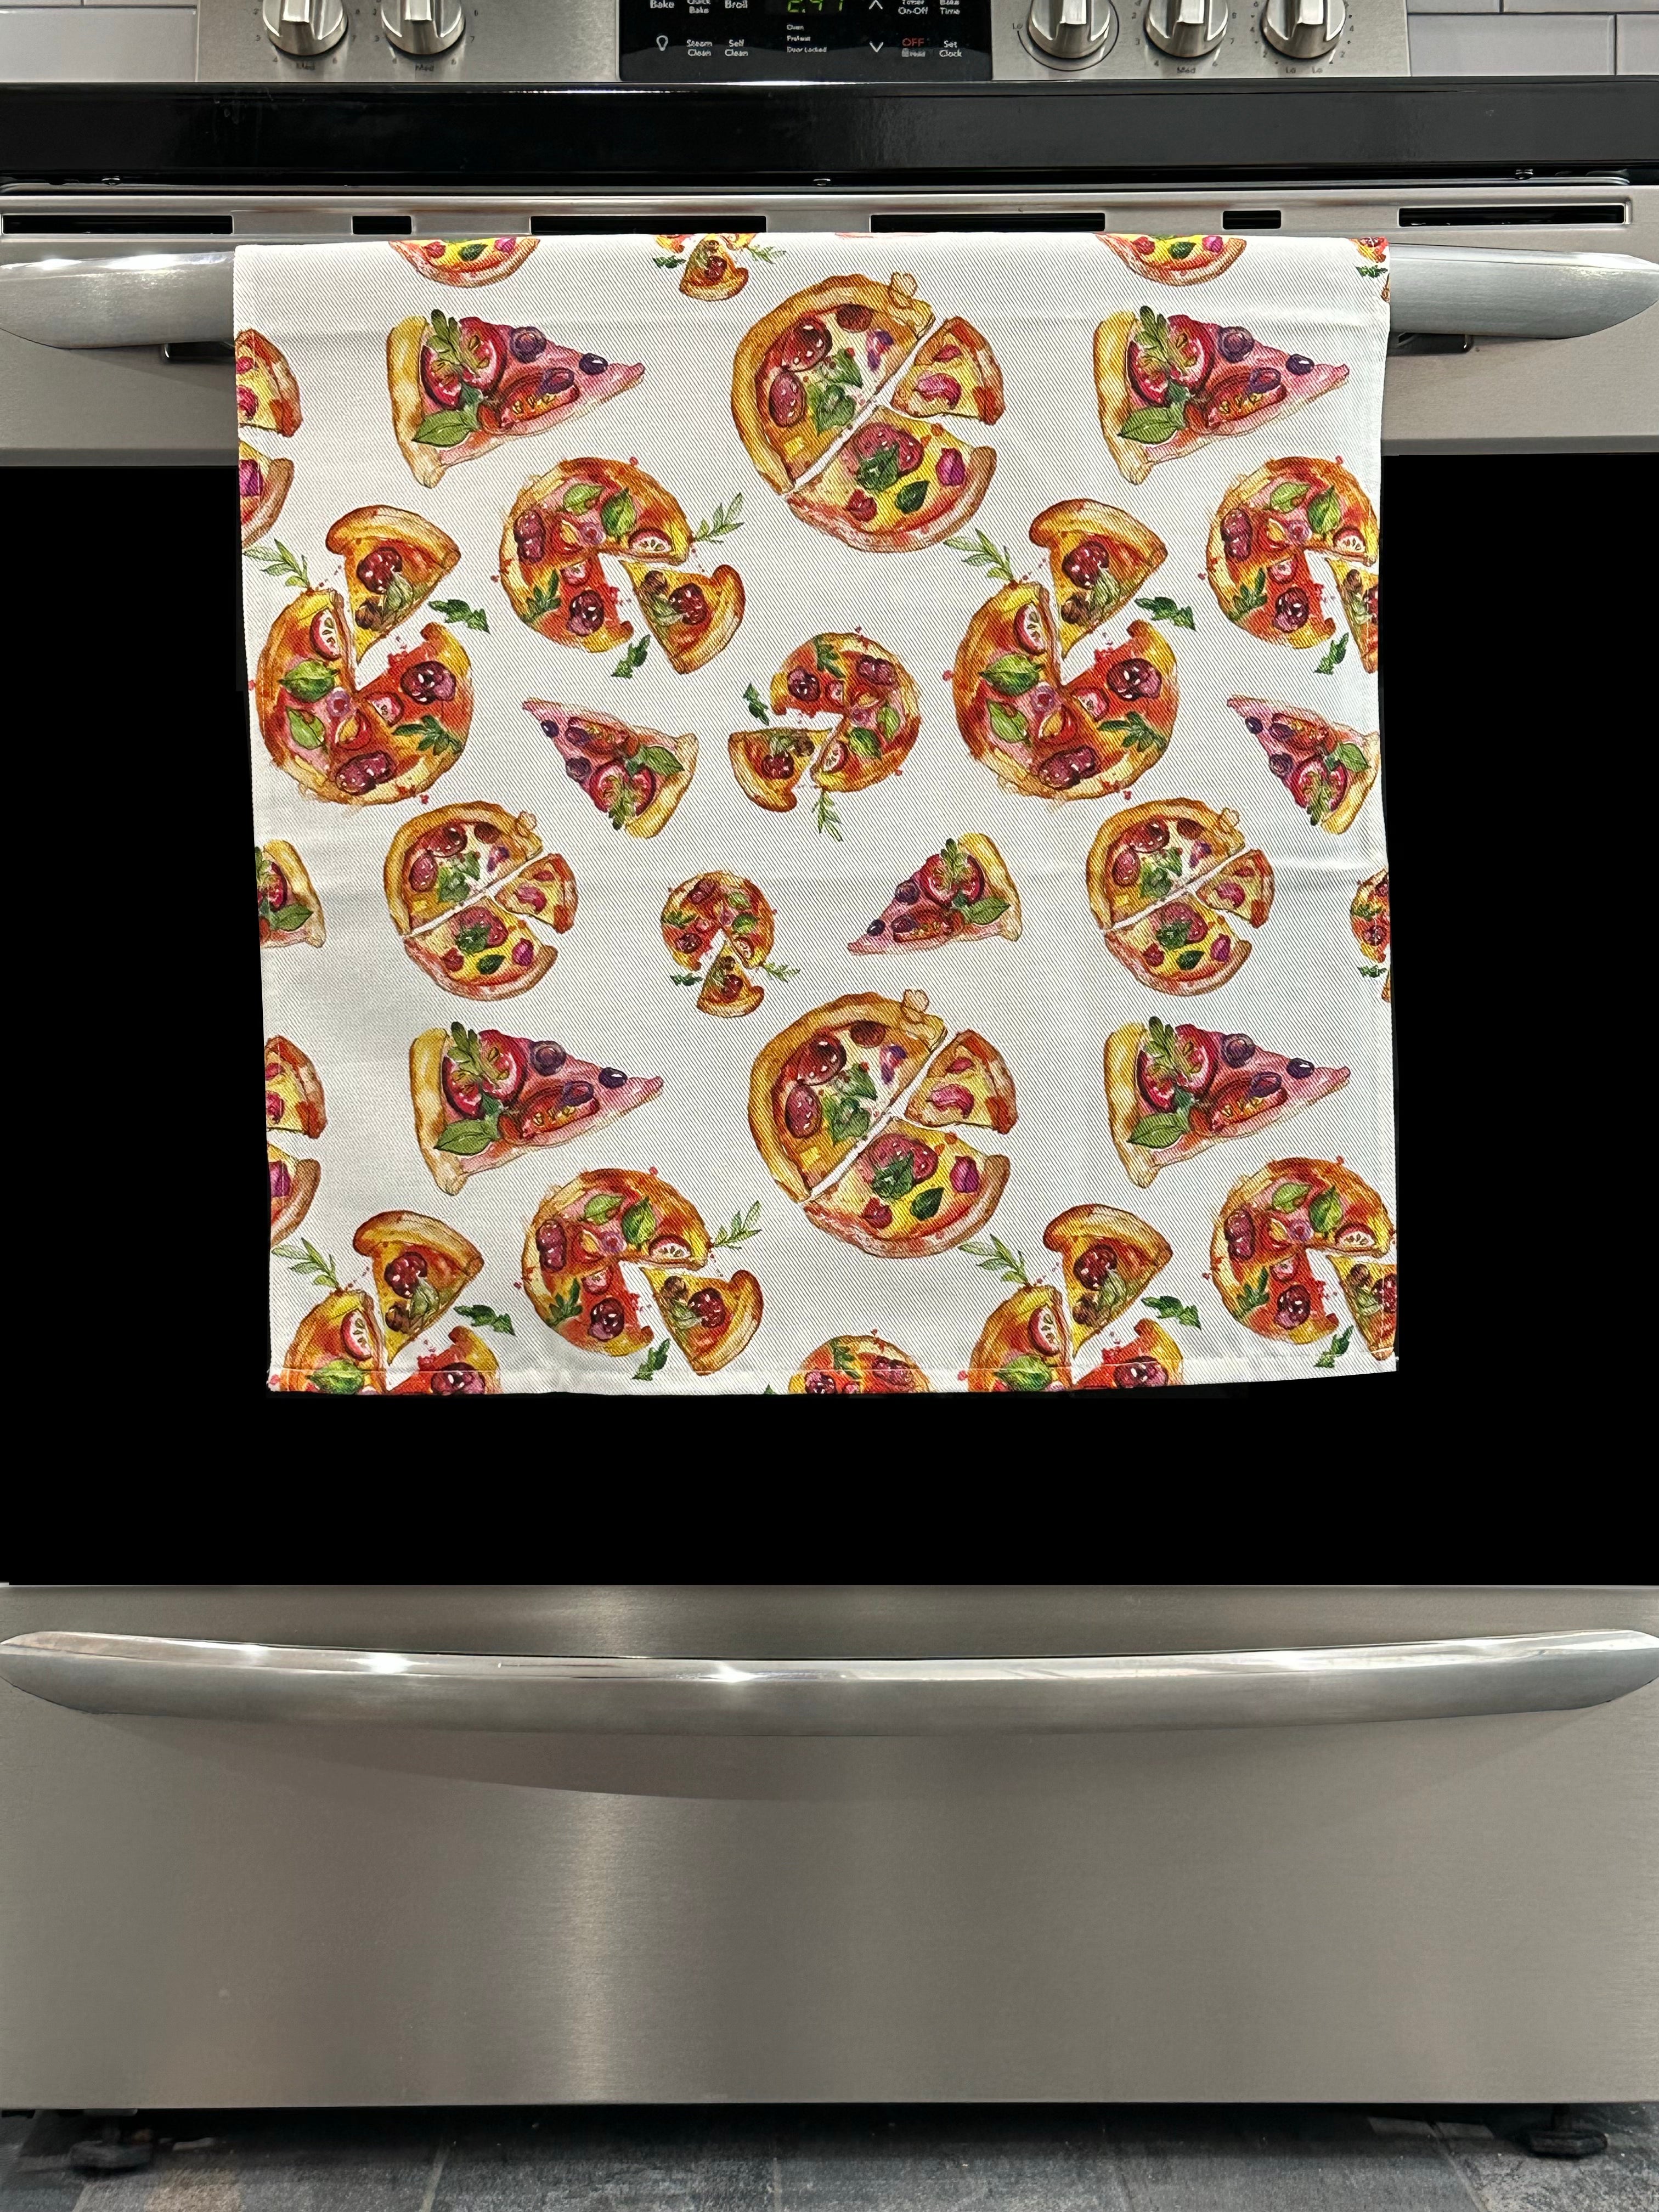 Kitchen Towel featuring a multicolor pizza design. Pictured here hanging on a stove.